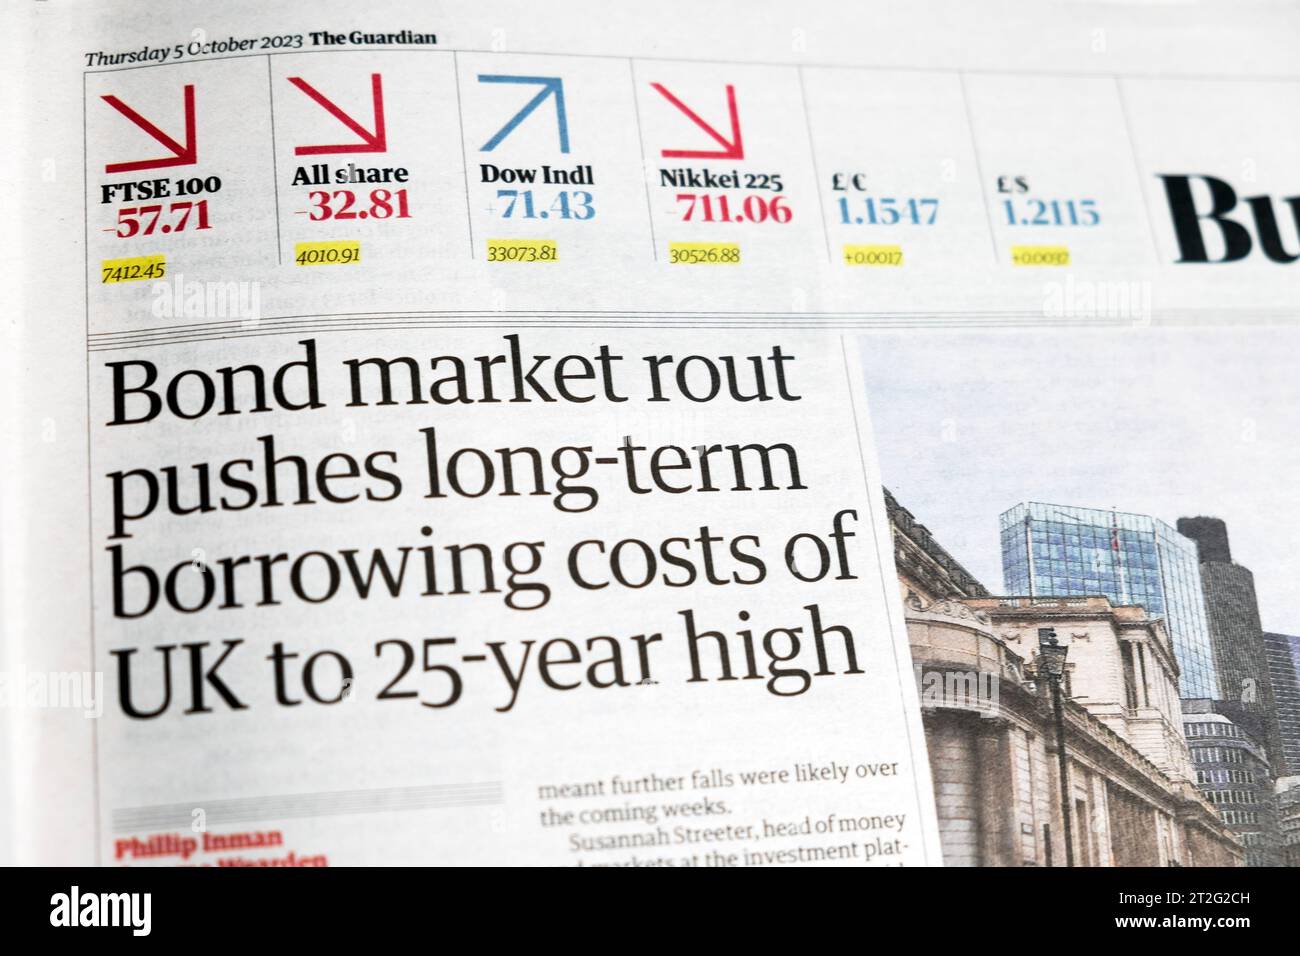 'Bond market rout pushes long-term borrowing costs of UK to 25 year high' Guardian newspaper headline Business section article 5 October 2023 London Stock Photo